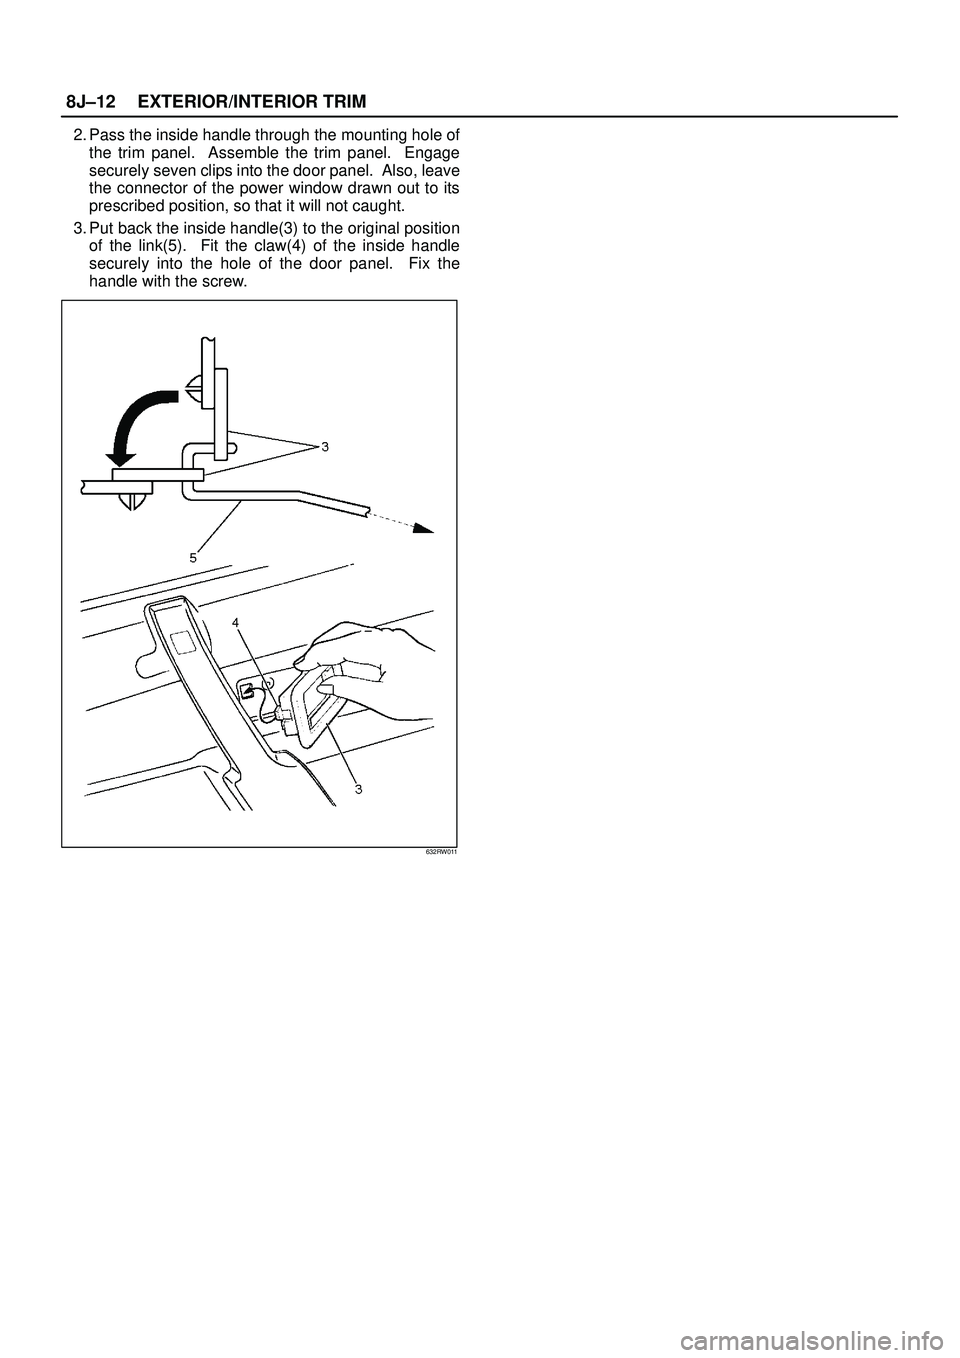 ISUZU TROOPER 1998  Service Manual PDF 8J±12EXTERIOR/INTERIOR TRIM
2. Pass the inside handle through the mounting hole of
the trim panel.  Assemble the trim panel.  Engage
securely seven clips into the door panel.  Also, leave
the connect